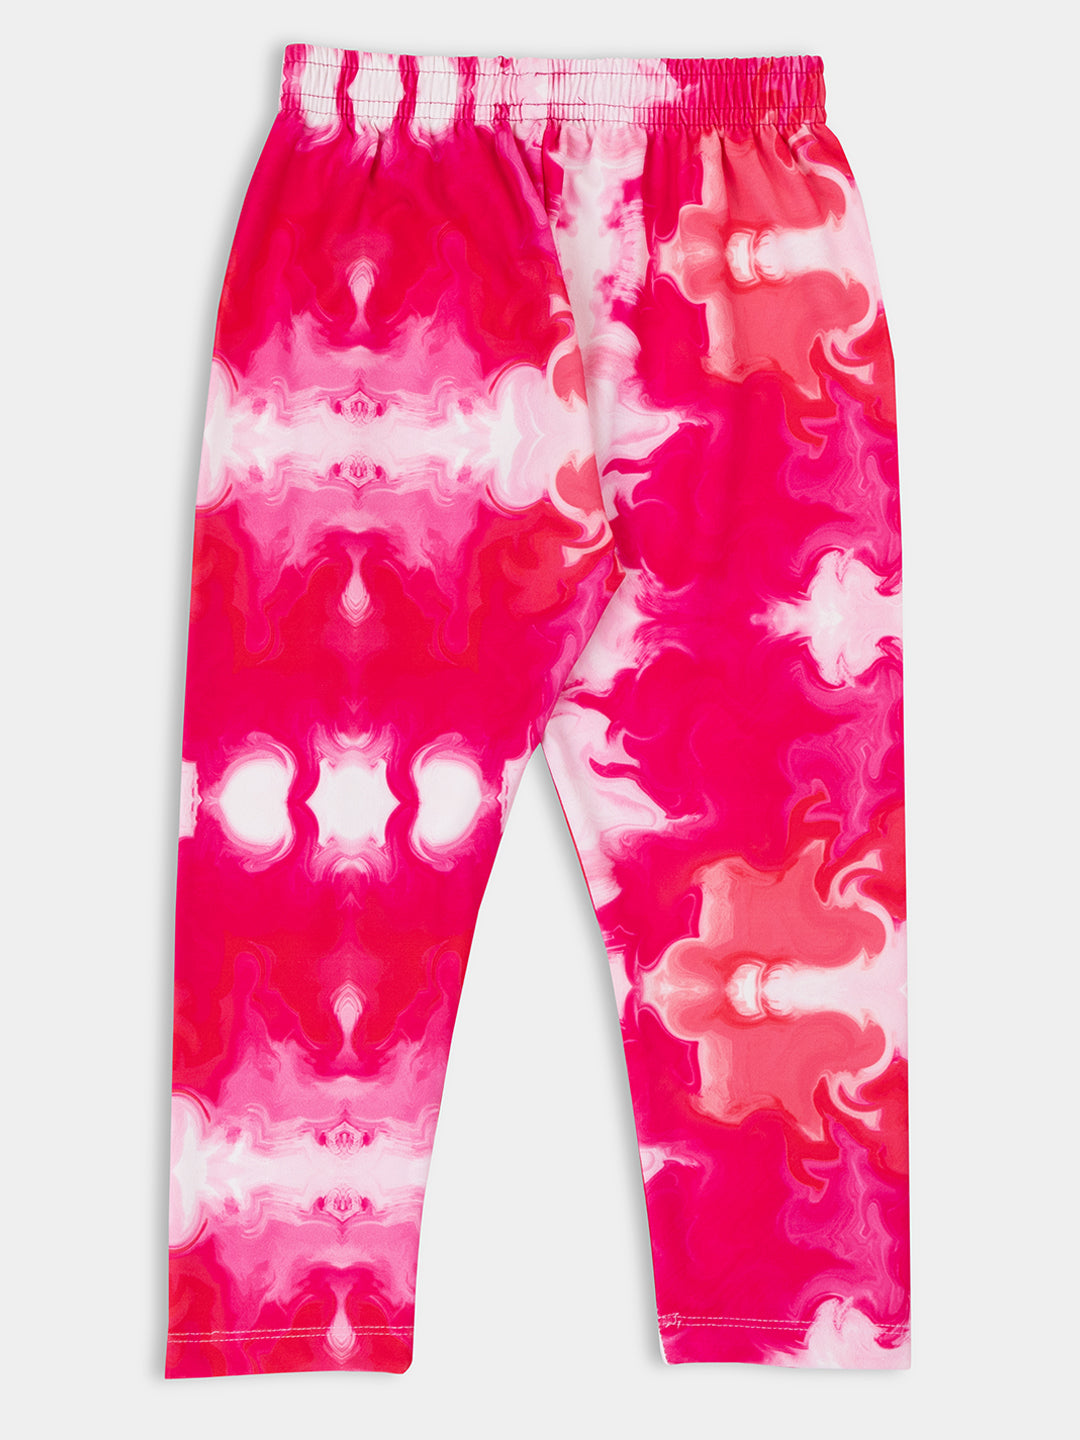 Stylish Blossoms: 5-Pack Printed Capris for Girls